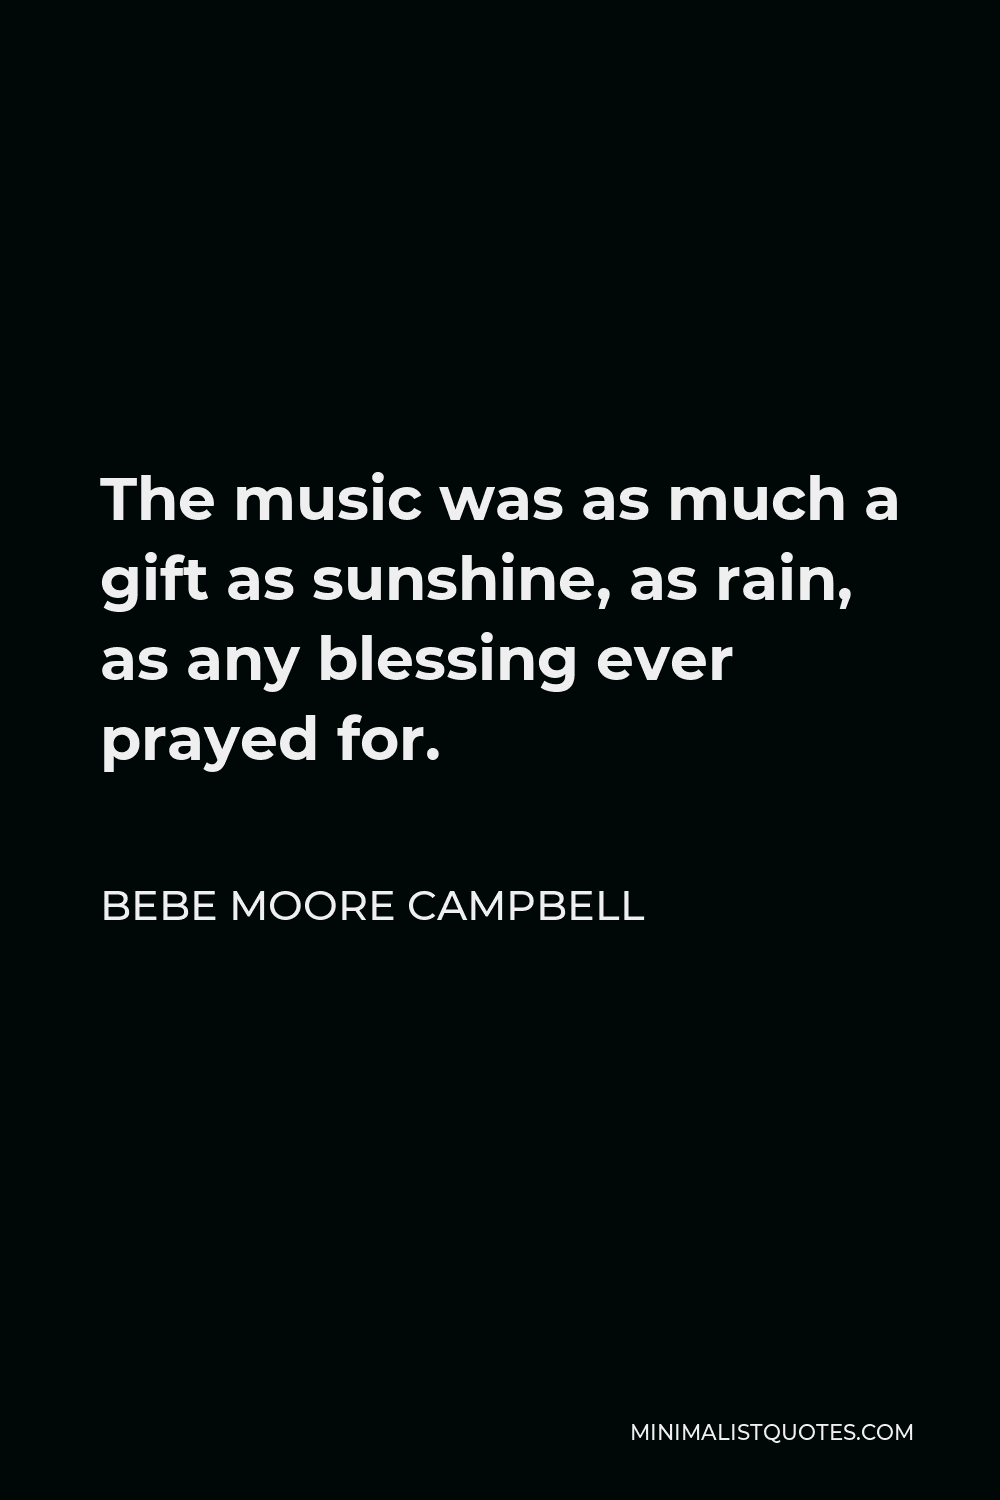 Bebe Moore Campbell Quote - The music was as much a gift as sunshine, as rain, as any blessing ever prayed for.